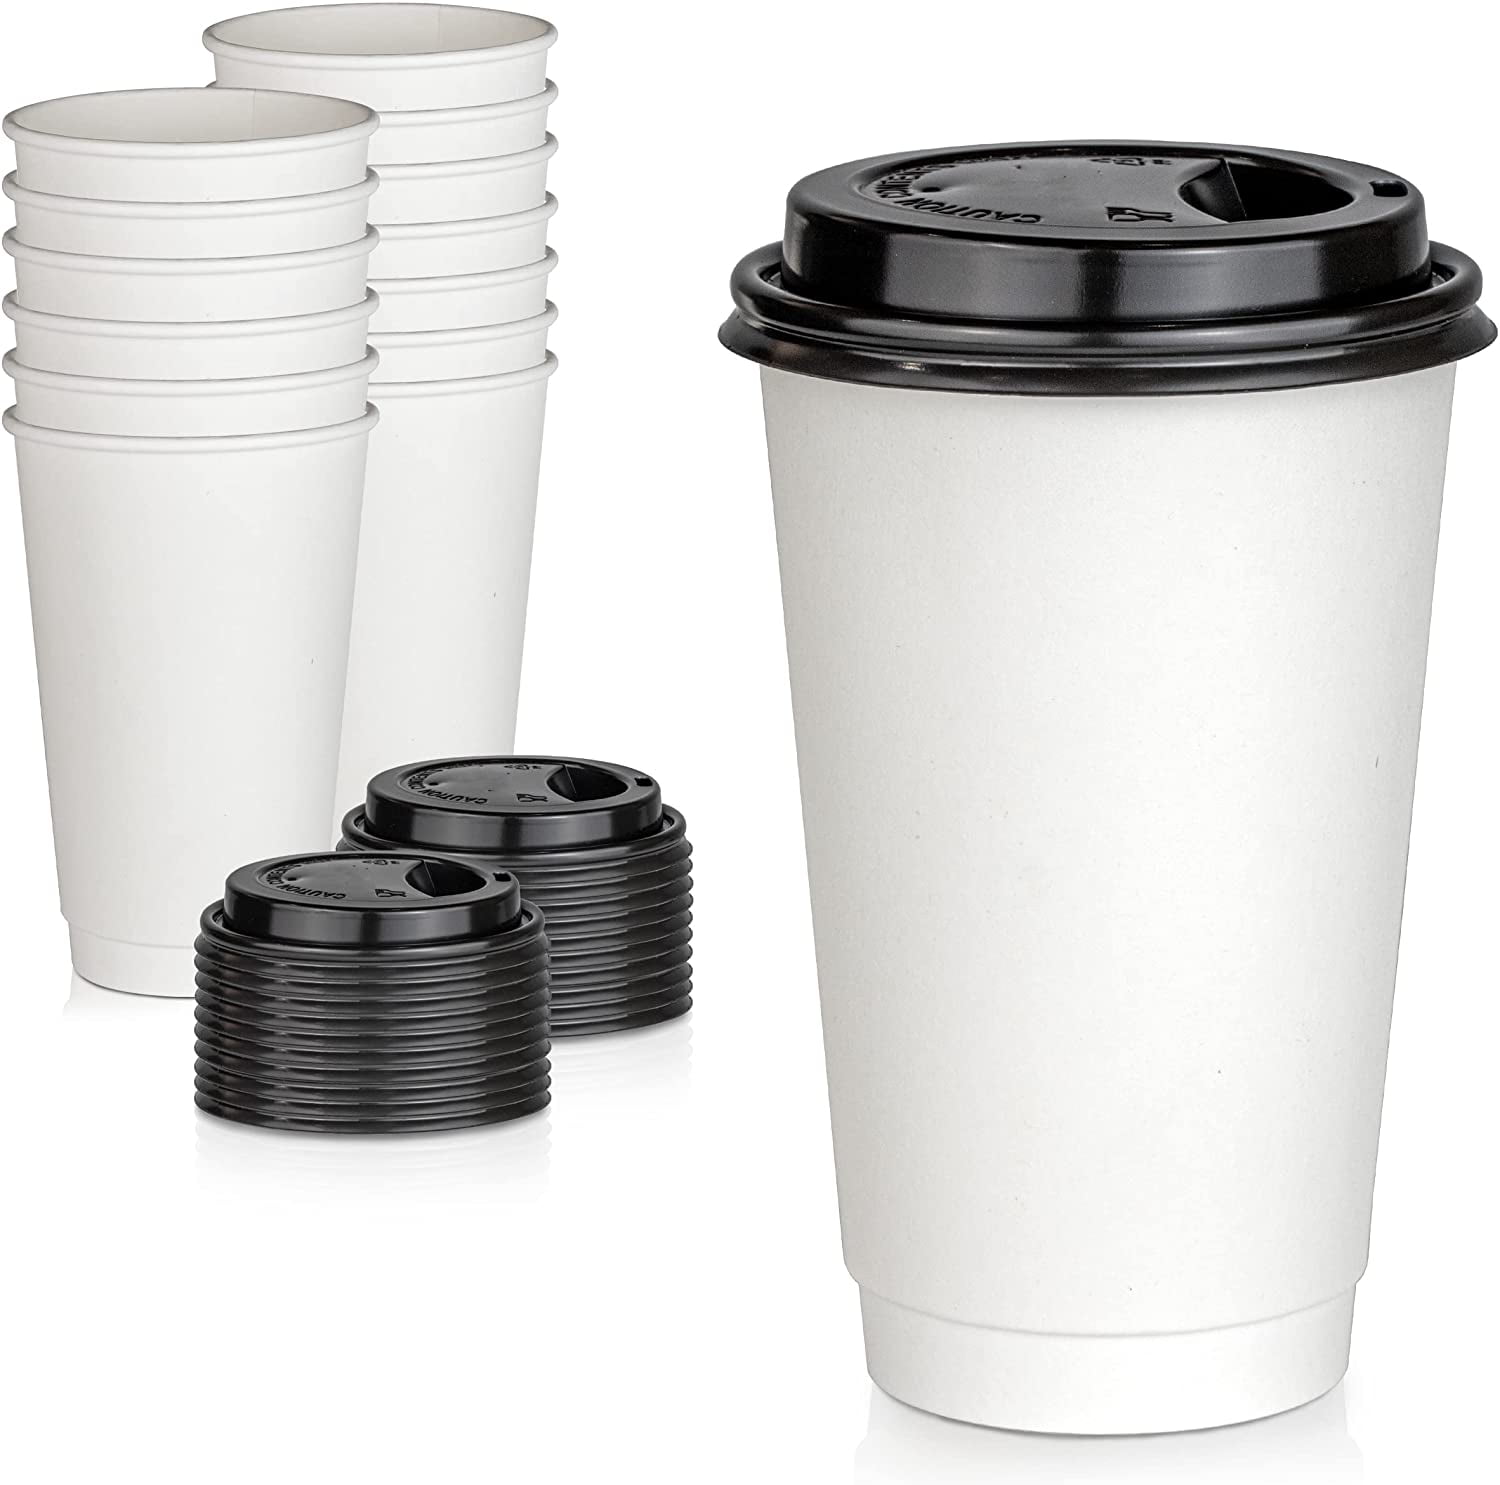 UDMG Reusable Double Wall Insulated White Ceramic Travel Coffee Cup with Lid & Sleeve, 12 fl.oz, I Am Not A Paper Cup